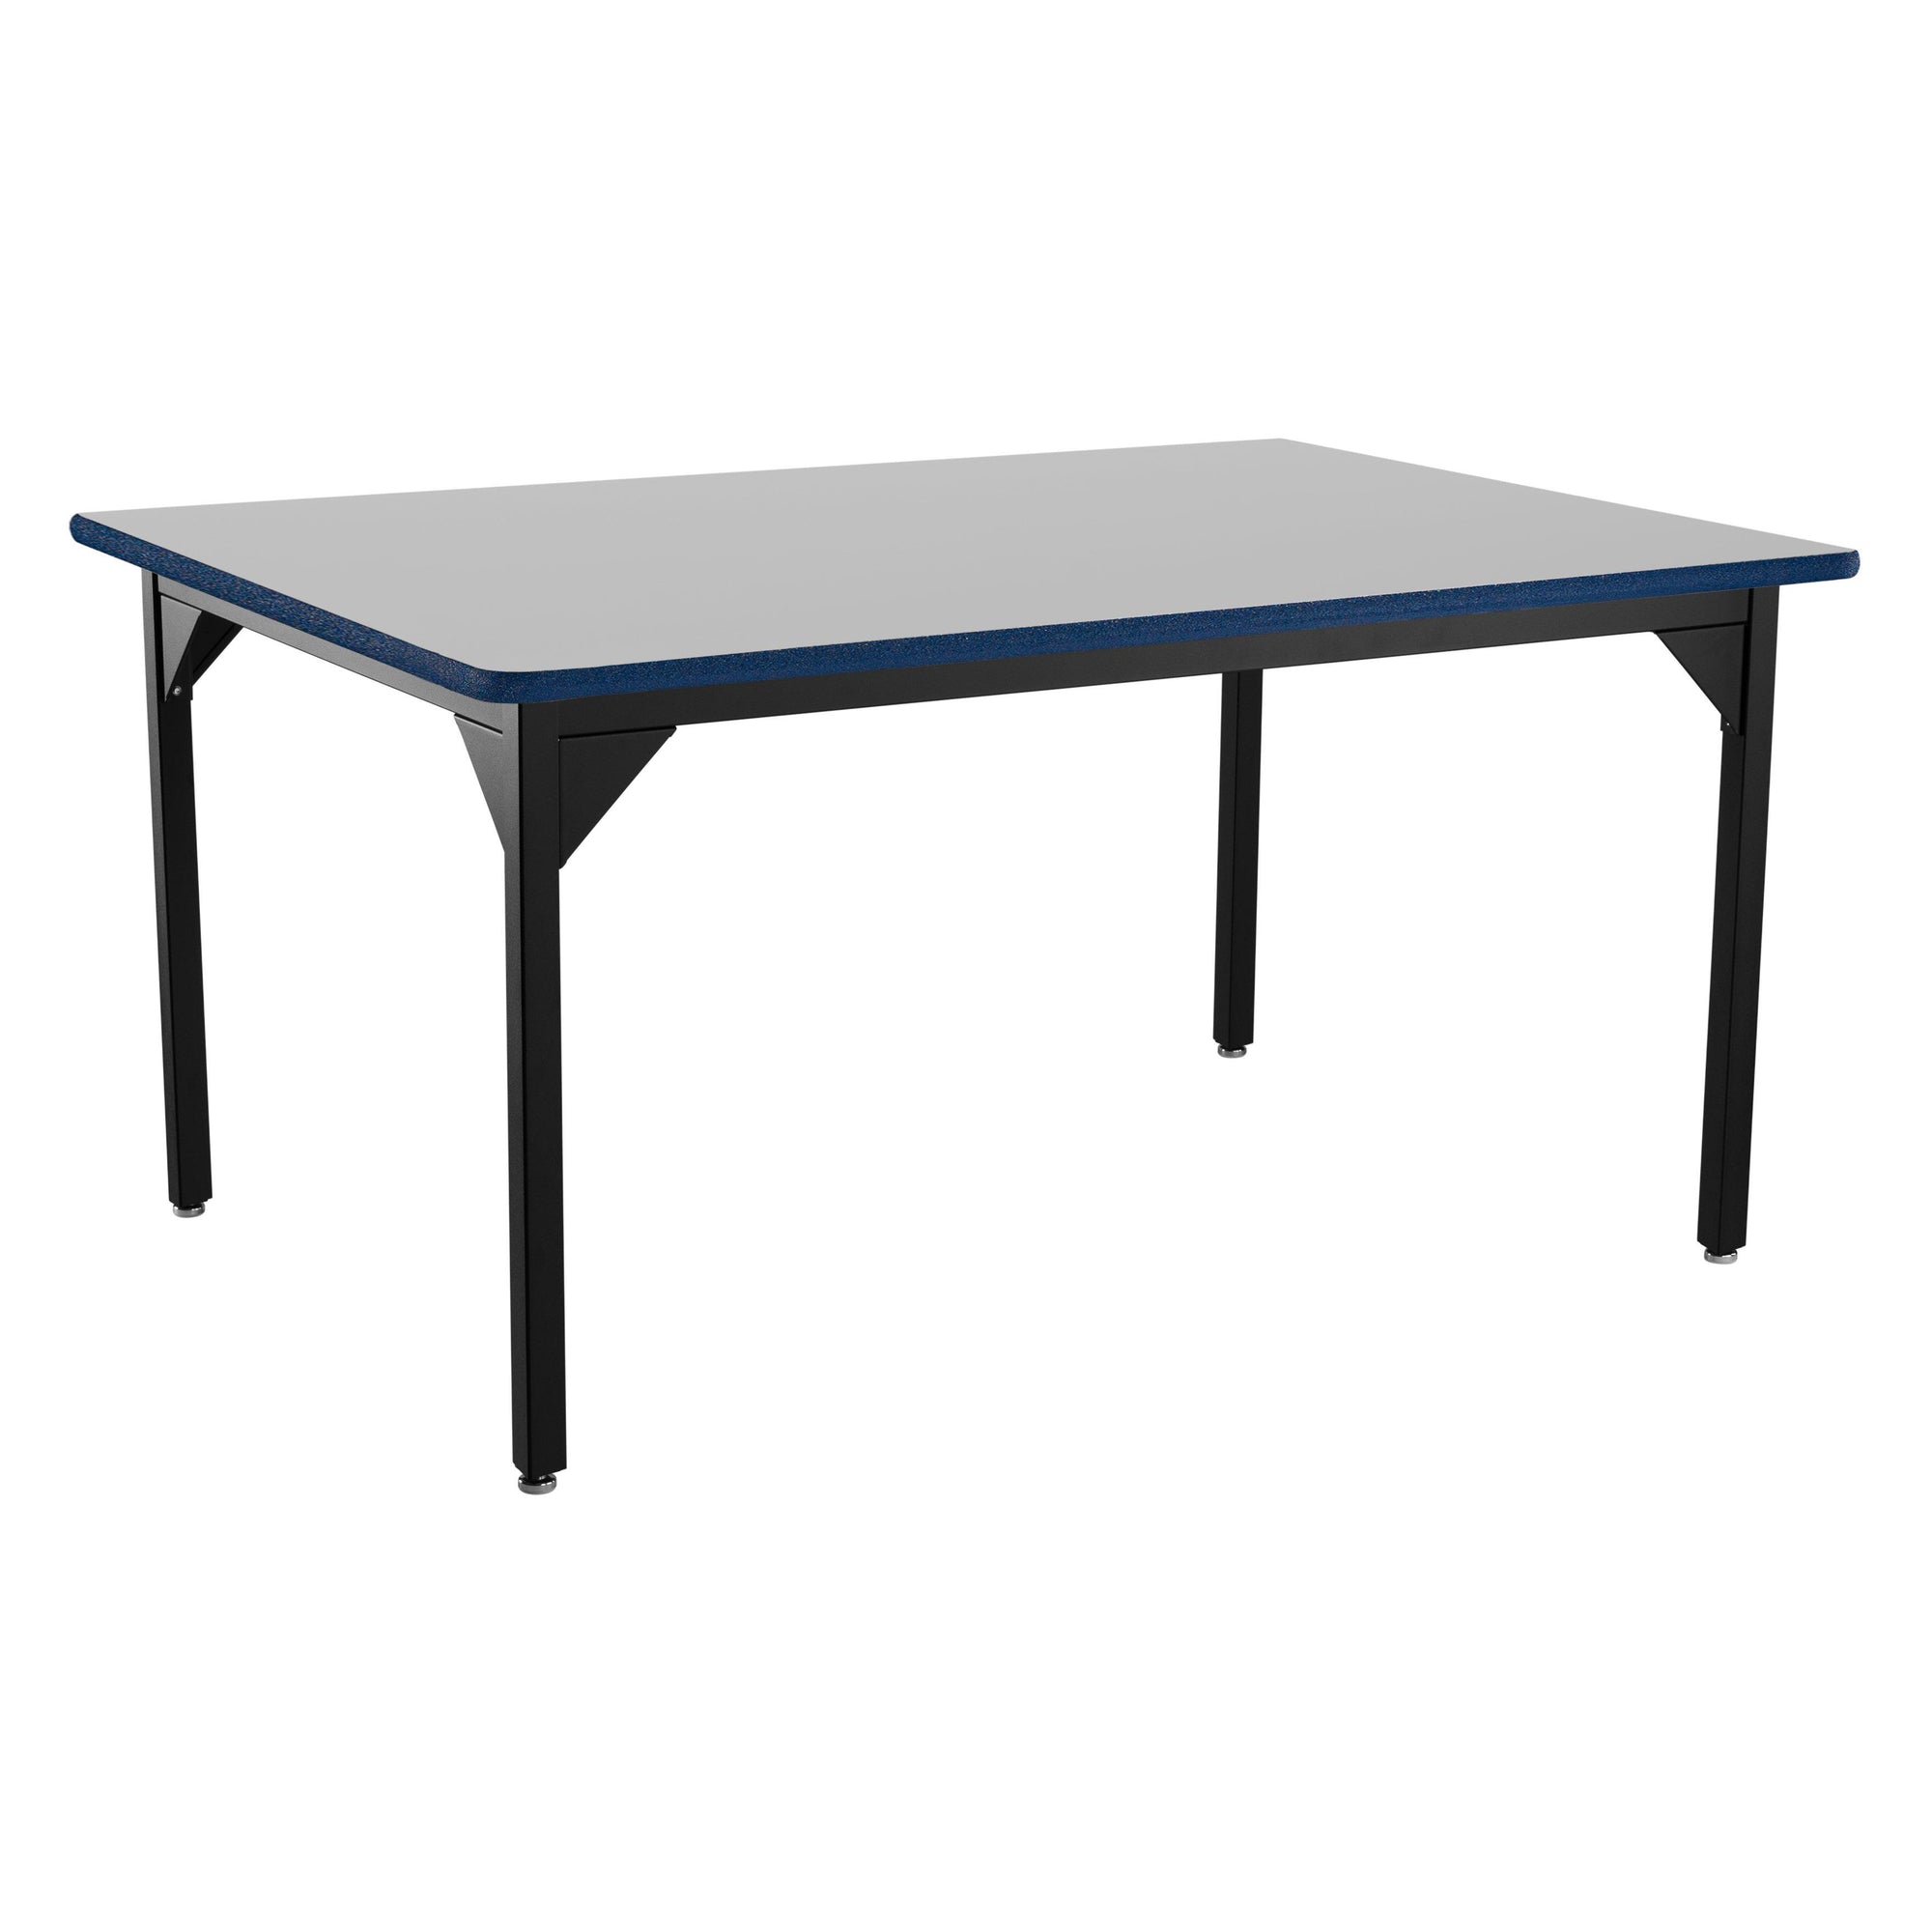 Heavy-Duty Fixed Height Utility Table, Black Frame, 42" x 60", Supreme High-Pressure Laminate Top with Black ProtectEdge